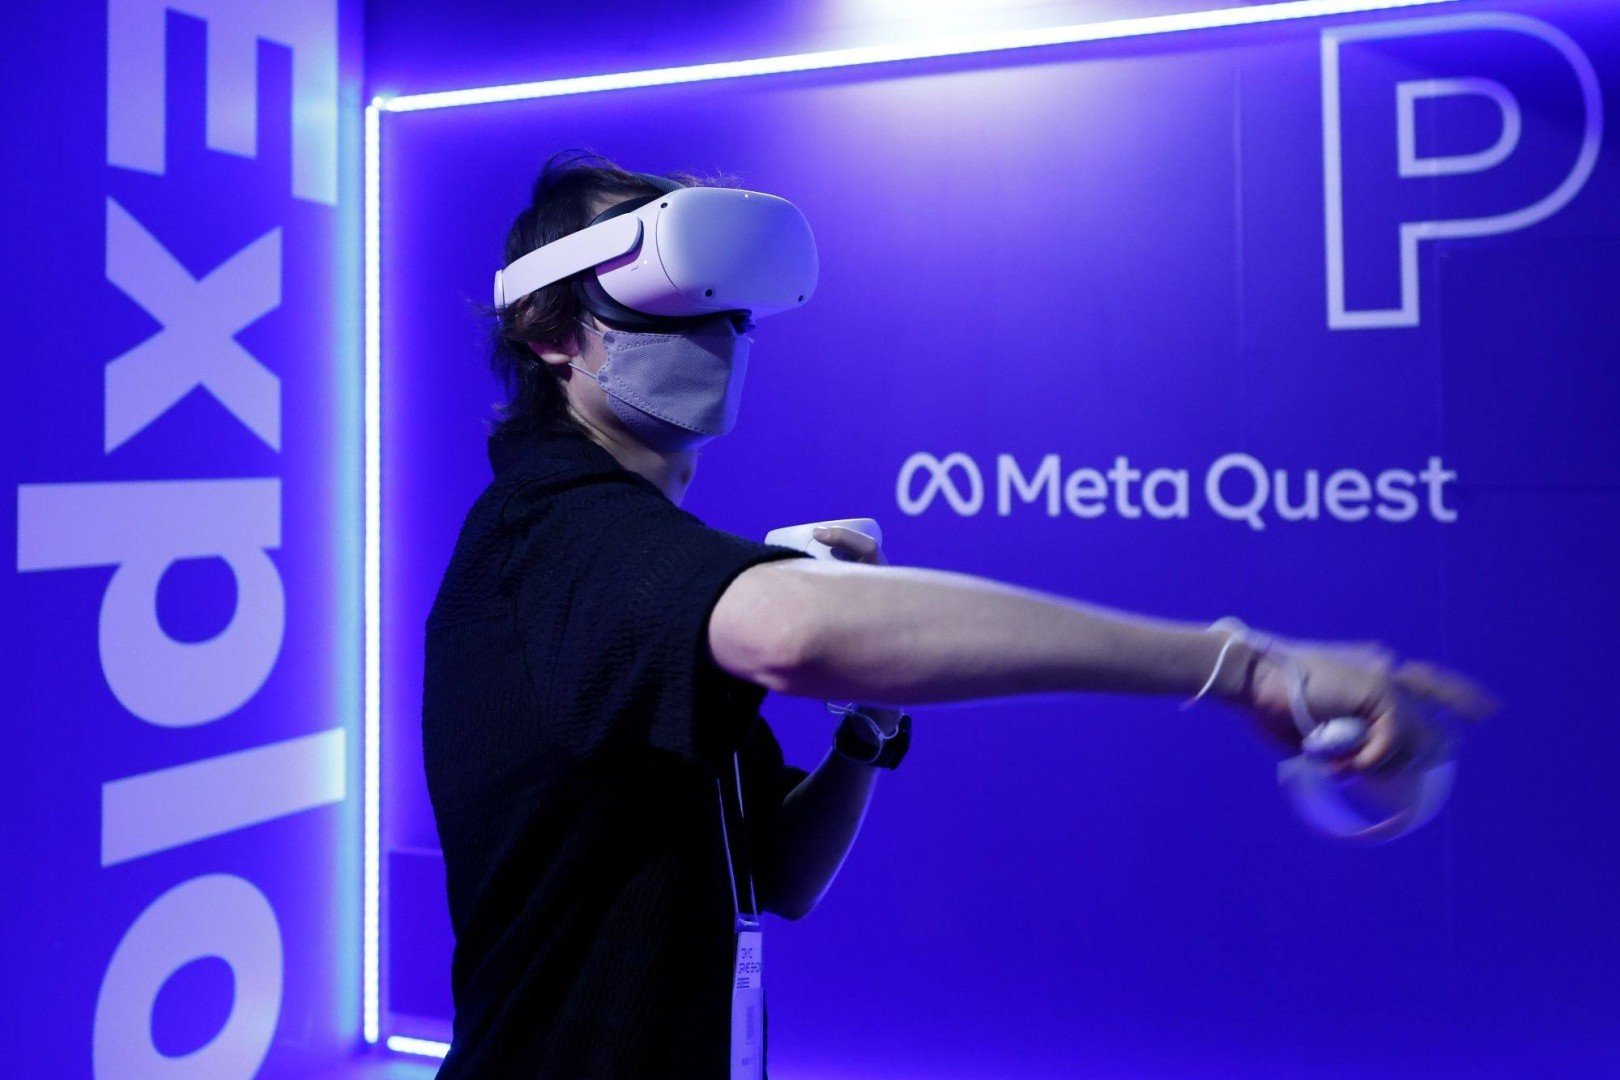 Meta talks to sell Quest 2 virtual reality headset China after failing to bring Facebook to the country: report South China Post